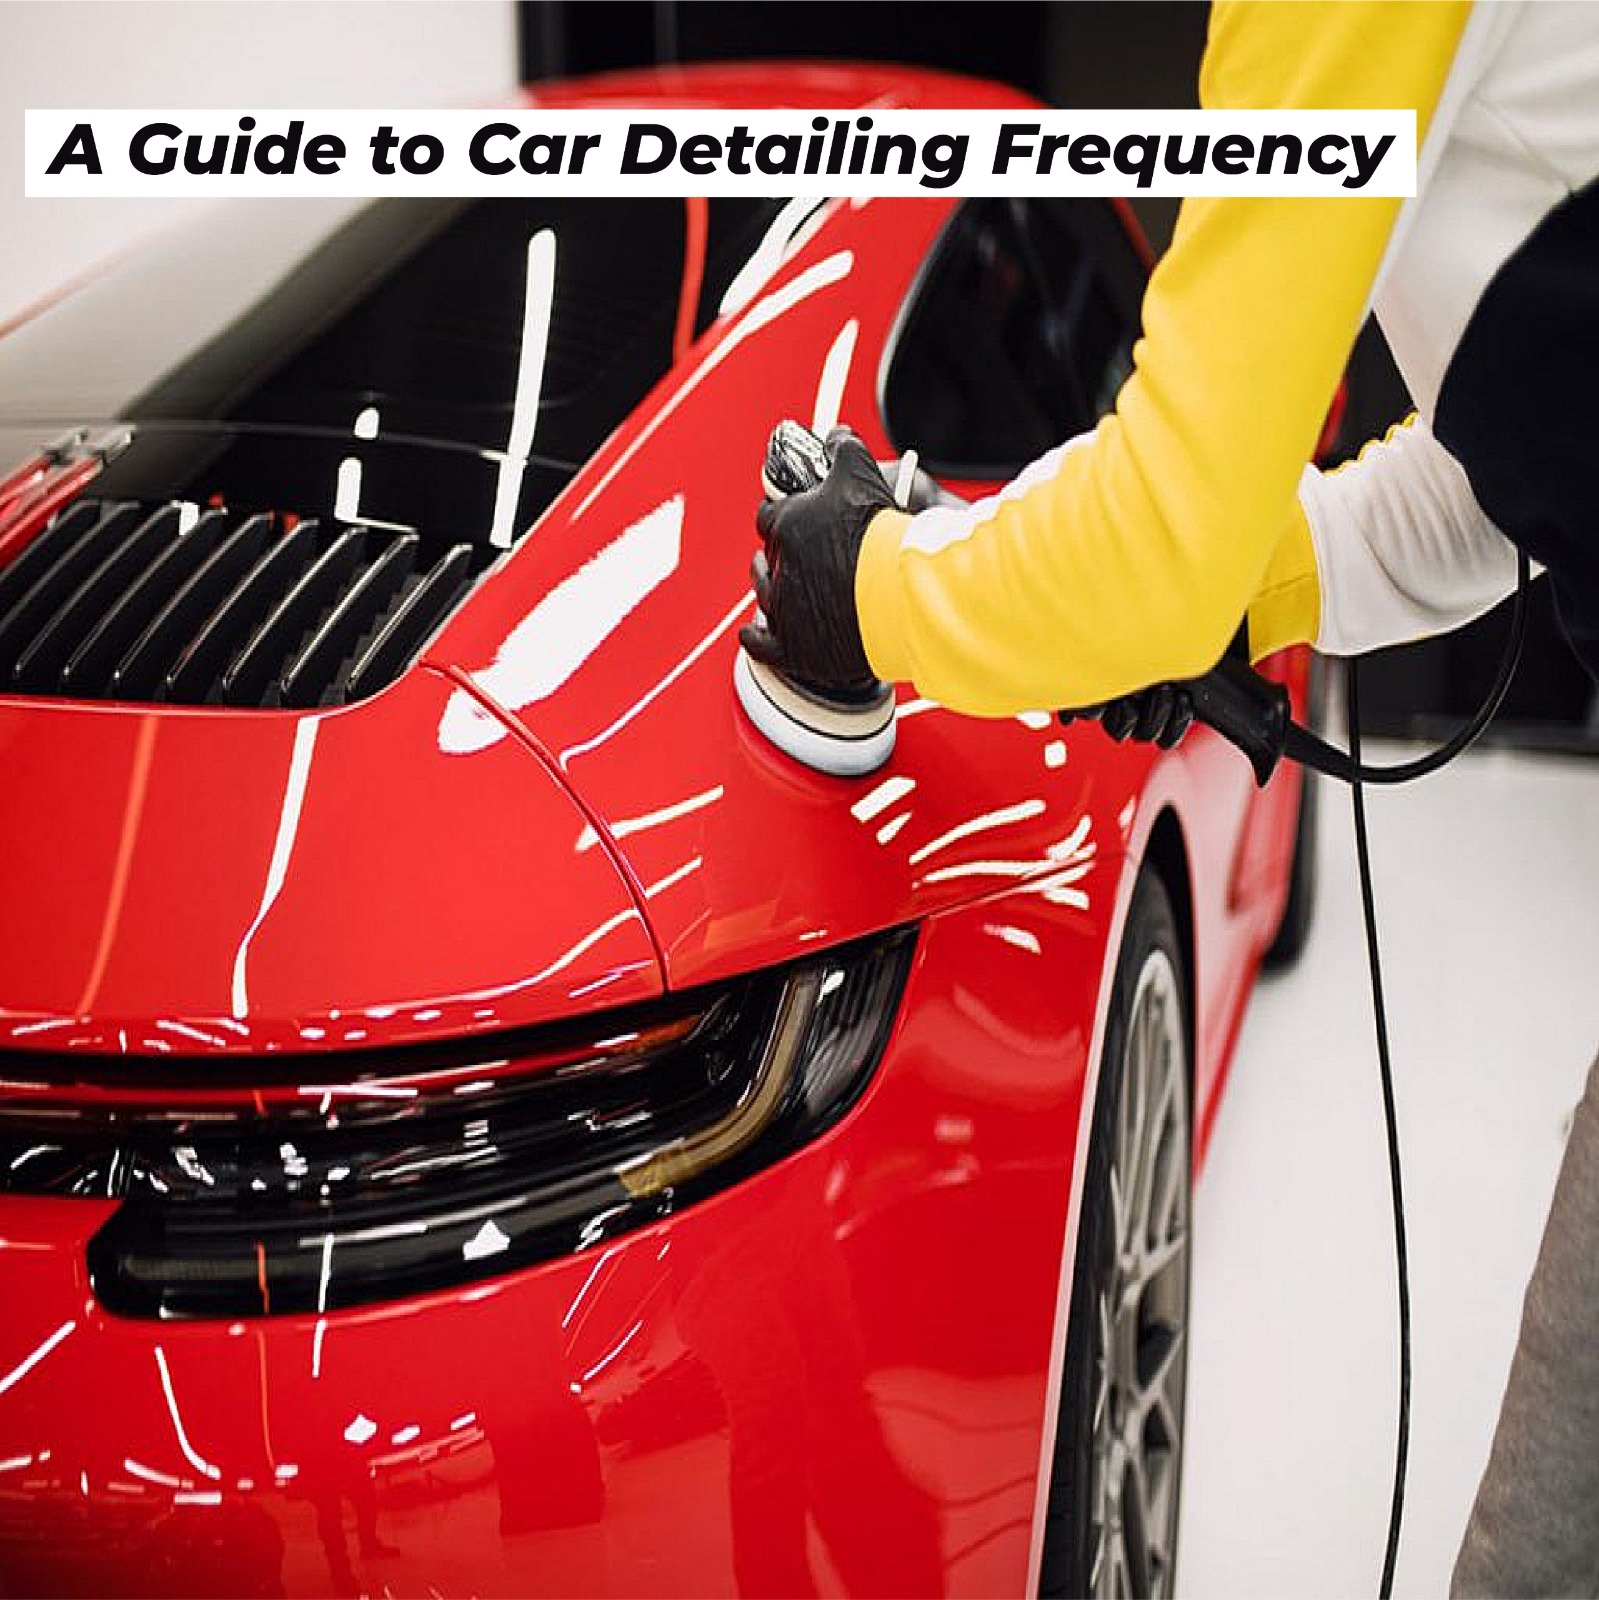 A-Guide-to-Car-Detailing-Frequency